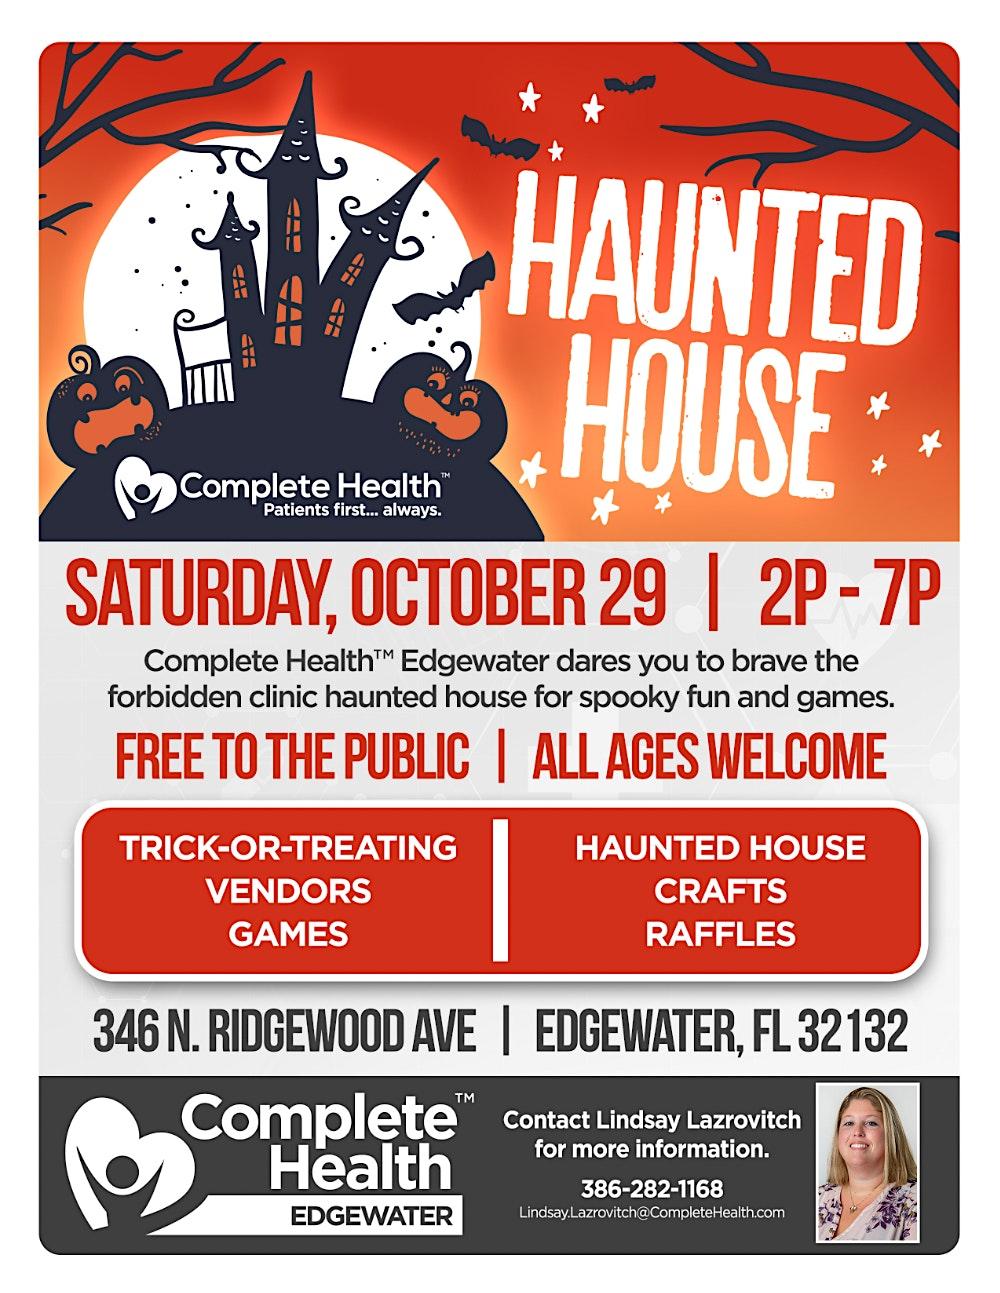 Forbidden Clinic Haunted House & Health Fair
Sat Oct 29, 2:00 PM - Sat Oct 29, 7:00 PM
in 9 days